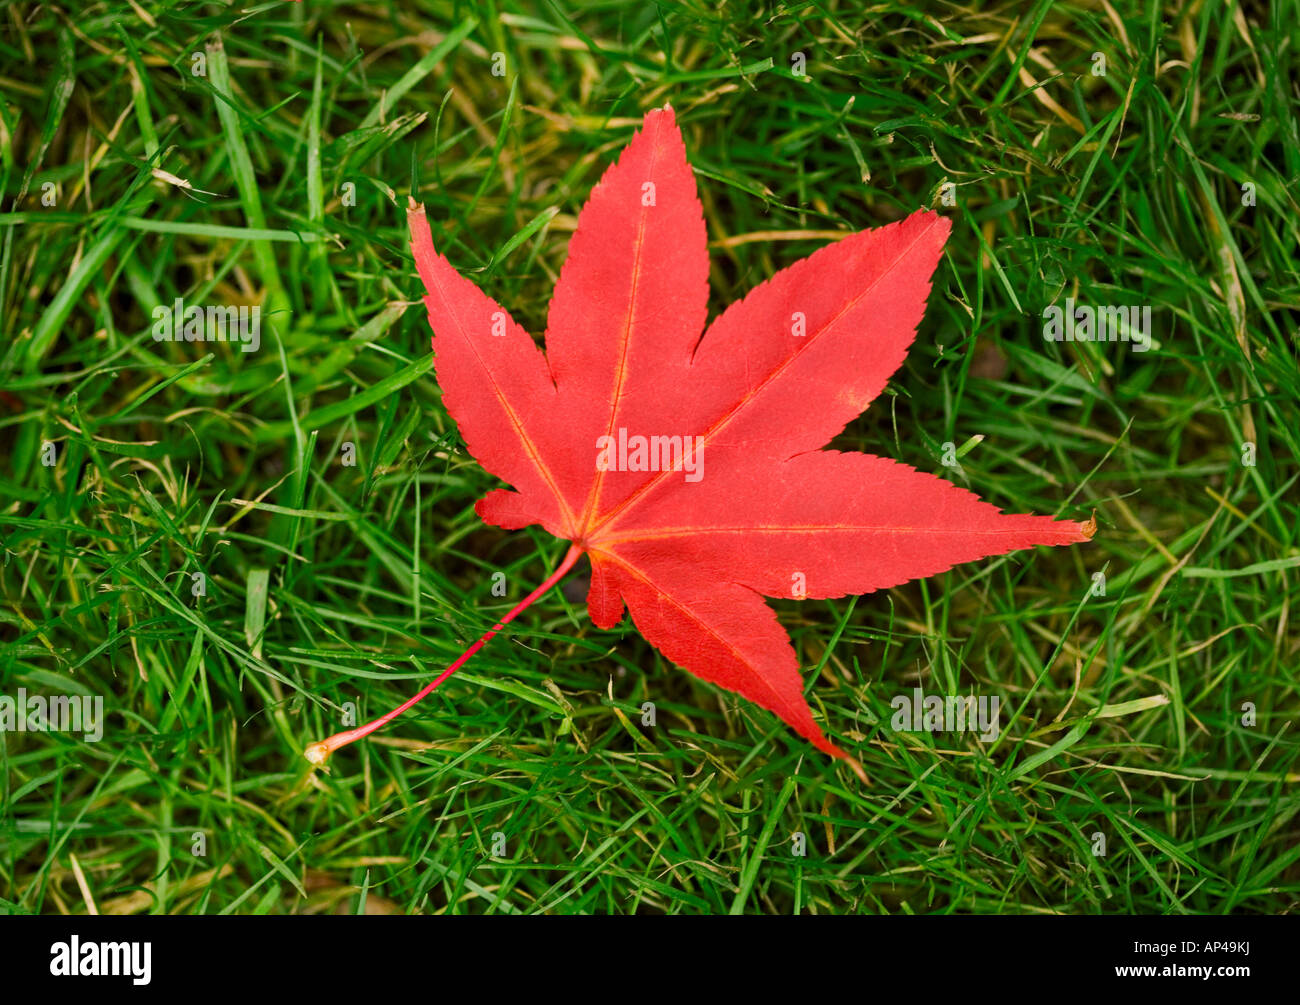 One single red maple leaf from the acer tree on grass Stock Photo